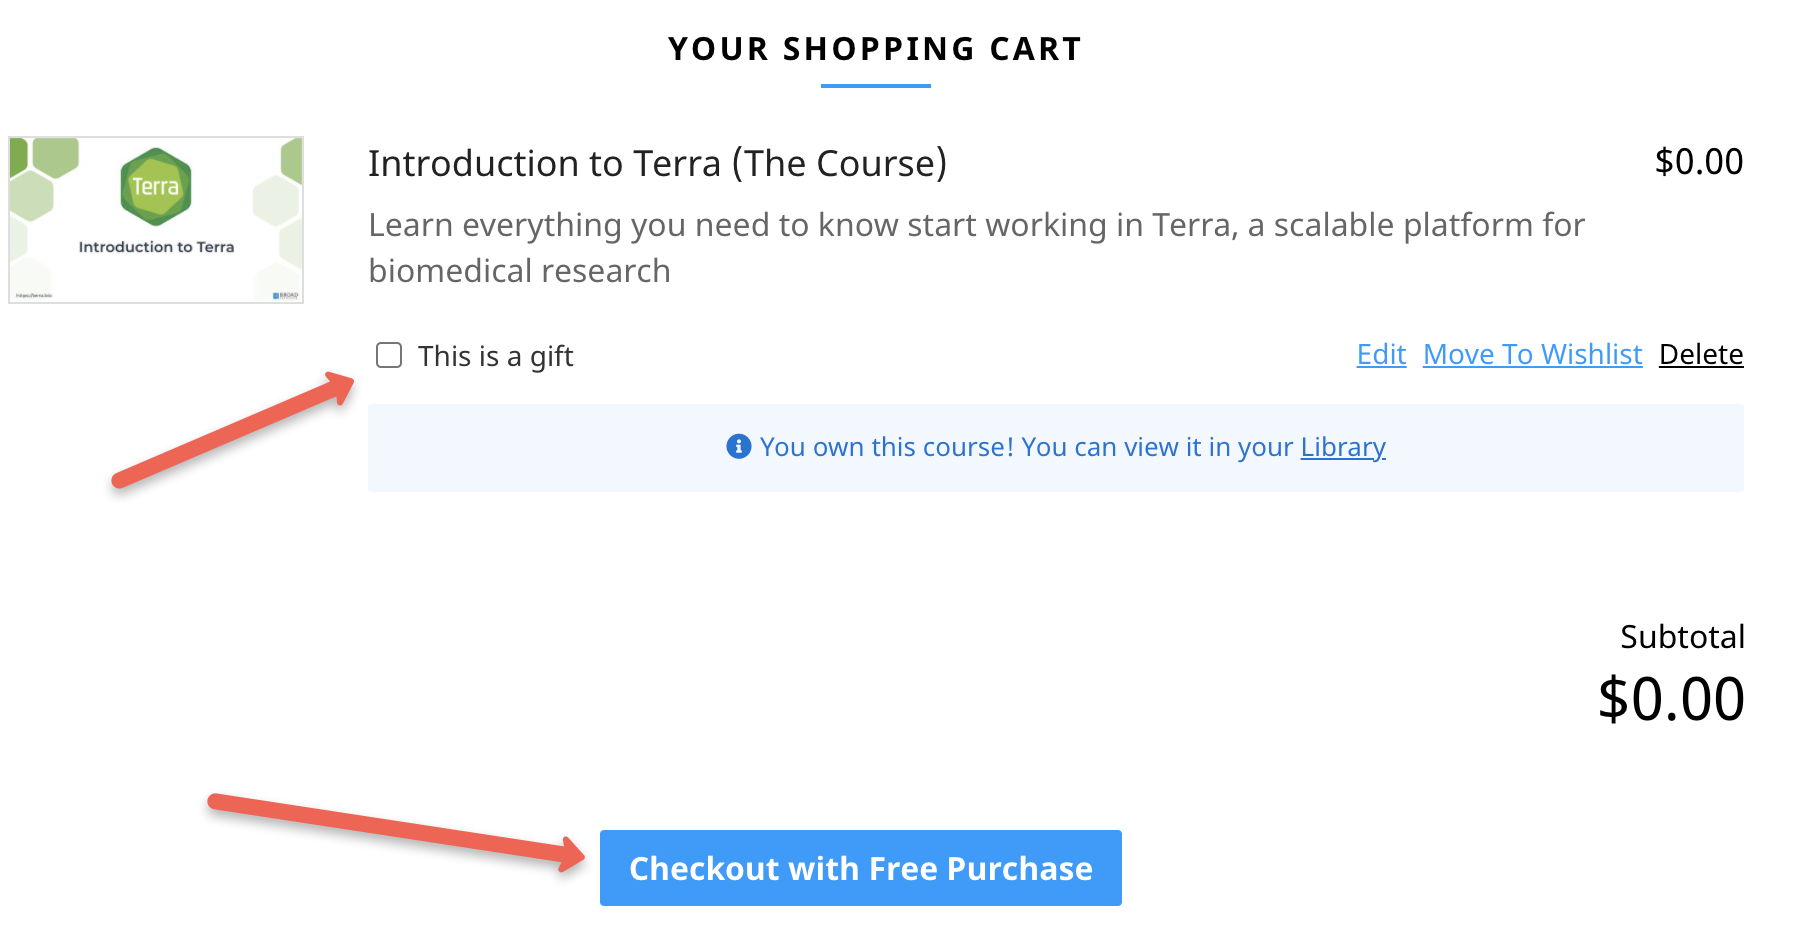 Screenshot of the leanlub shopping cart with Intro to Terra in the cart. An arrow points to the This is a gift option at the top left and a blue Checkout with free purchase button at the bottom.